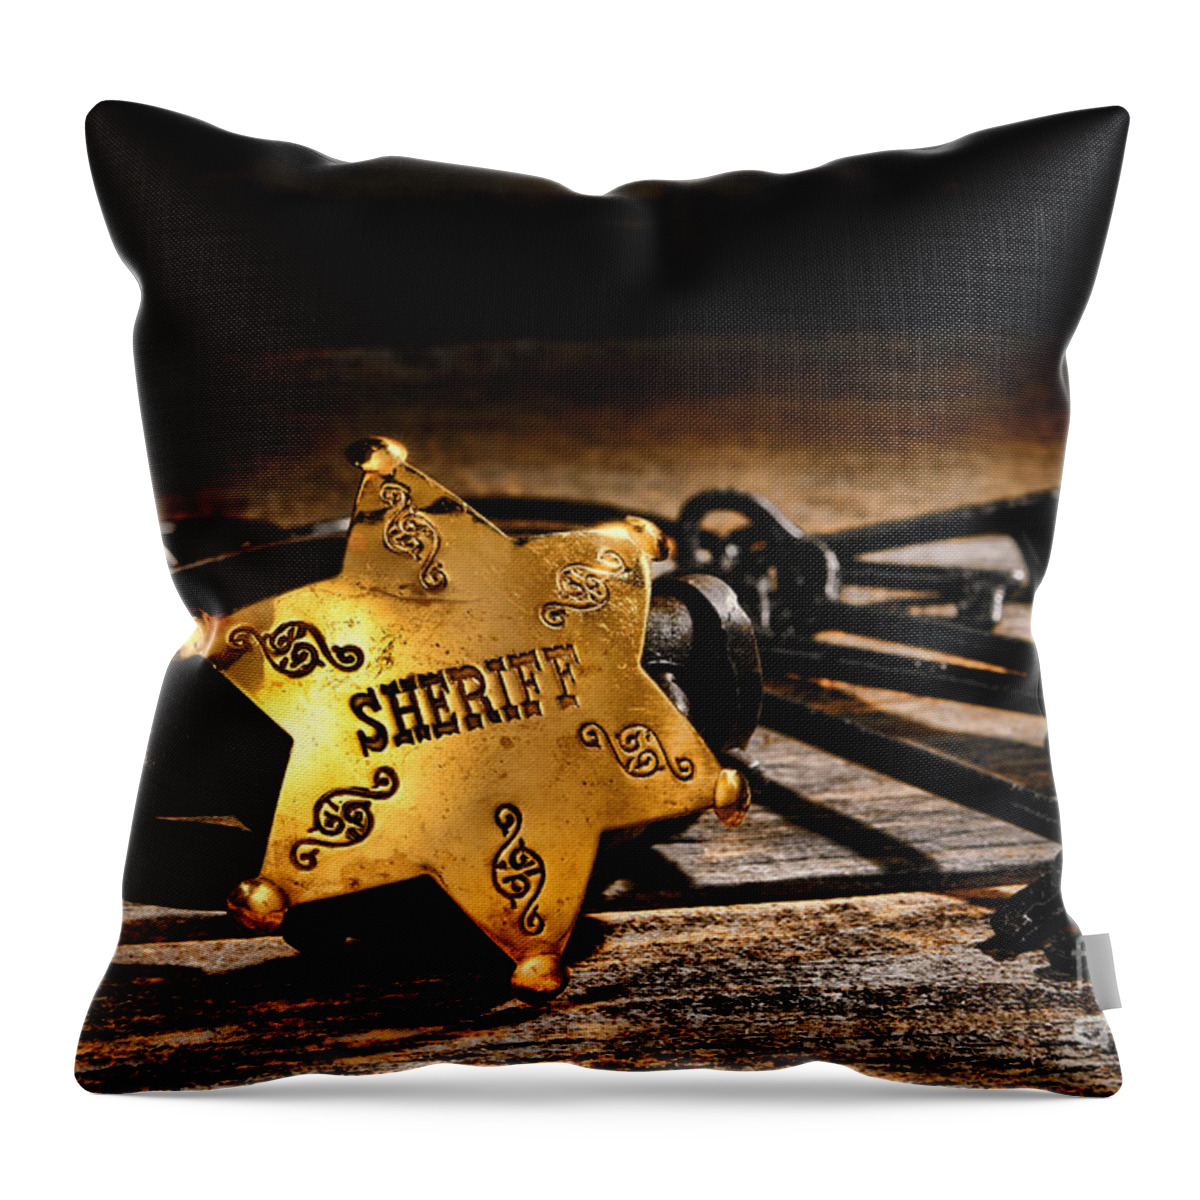 Sheriff Throw Pillow featuring the photograph Jailer Tools by Olivier Le Queinec